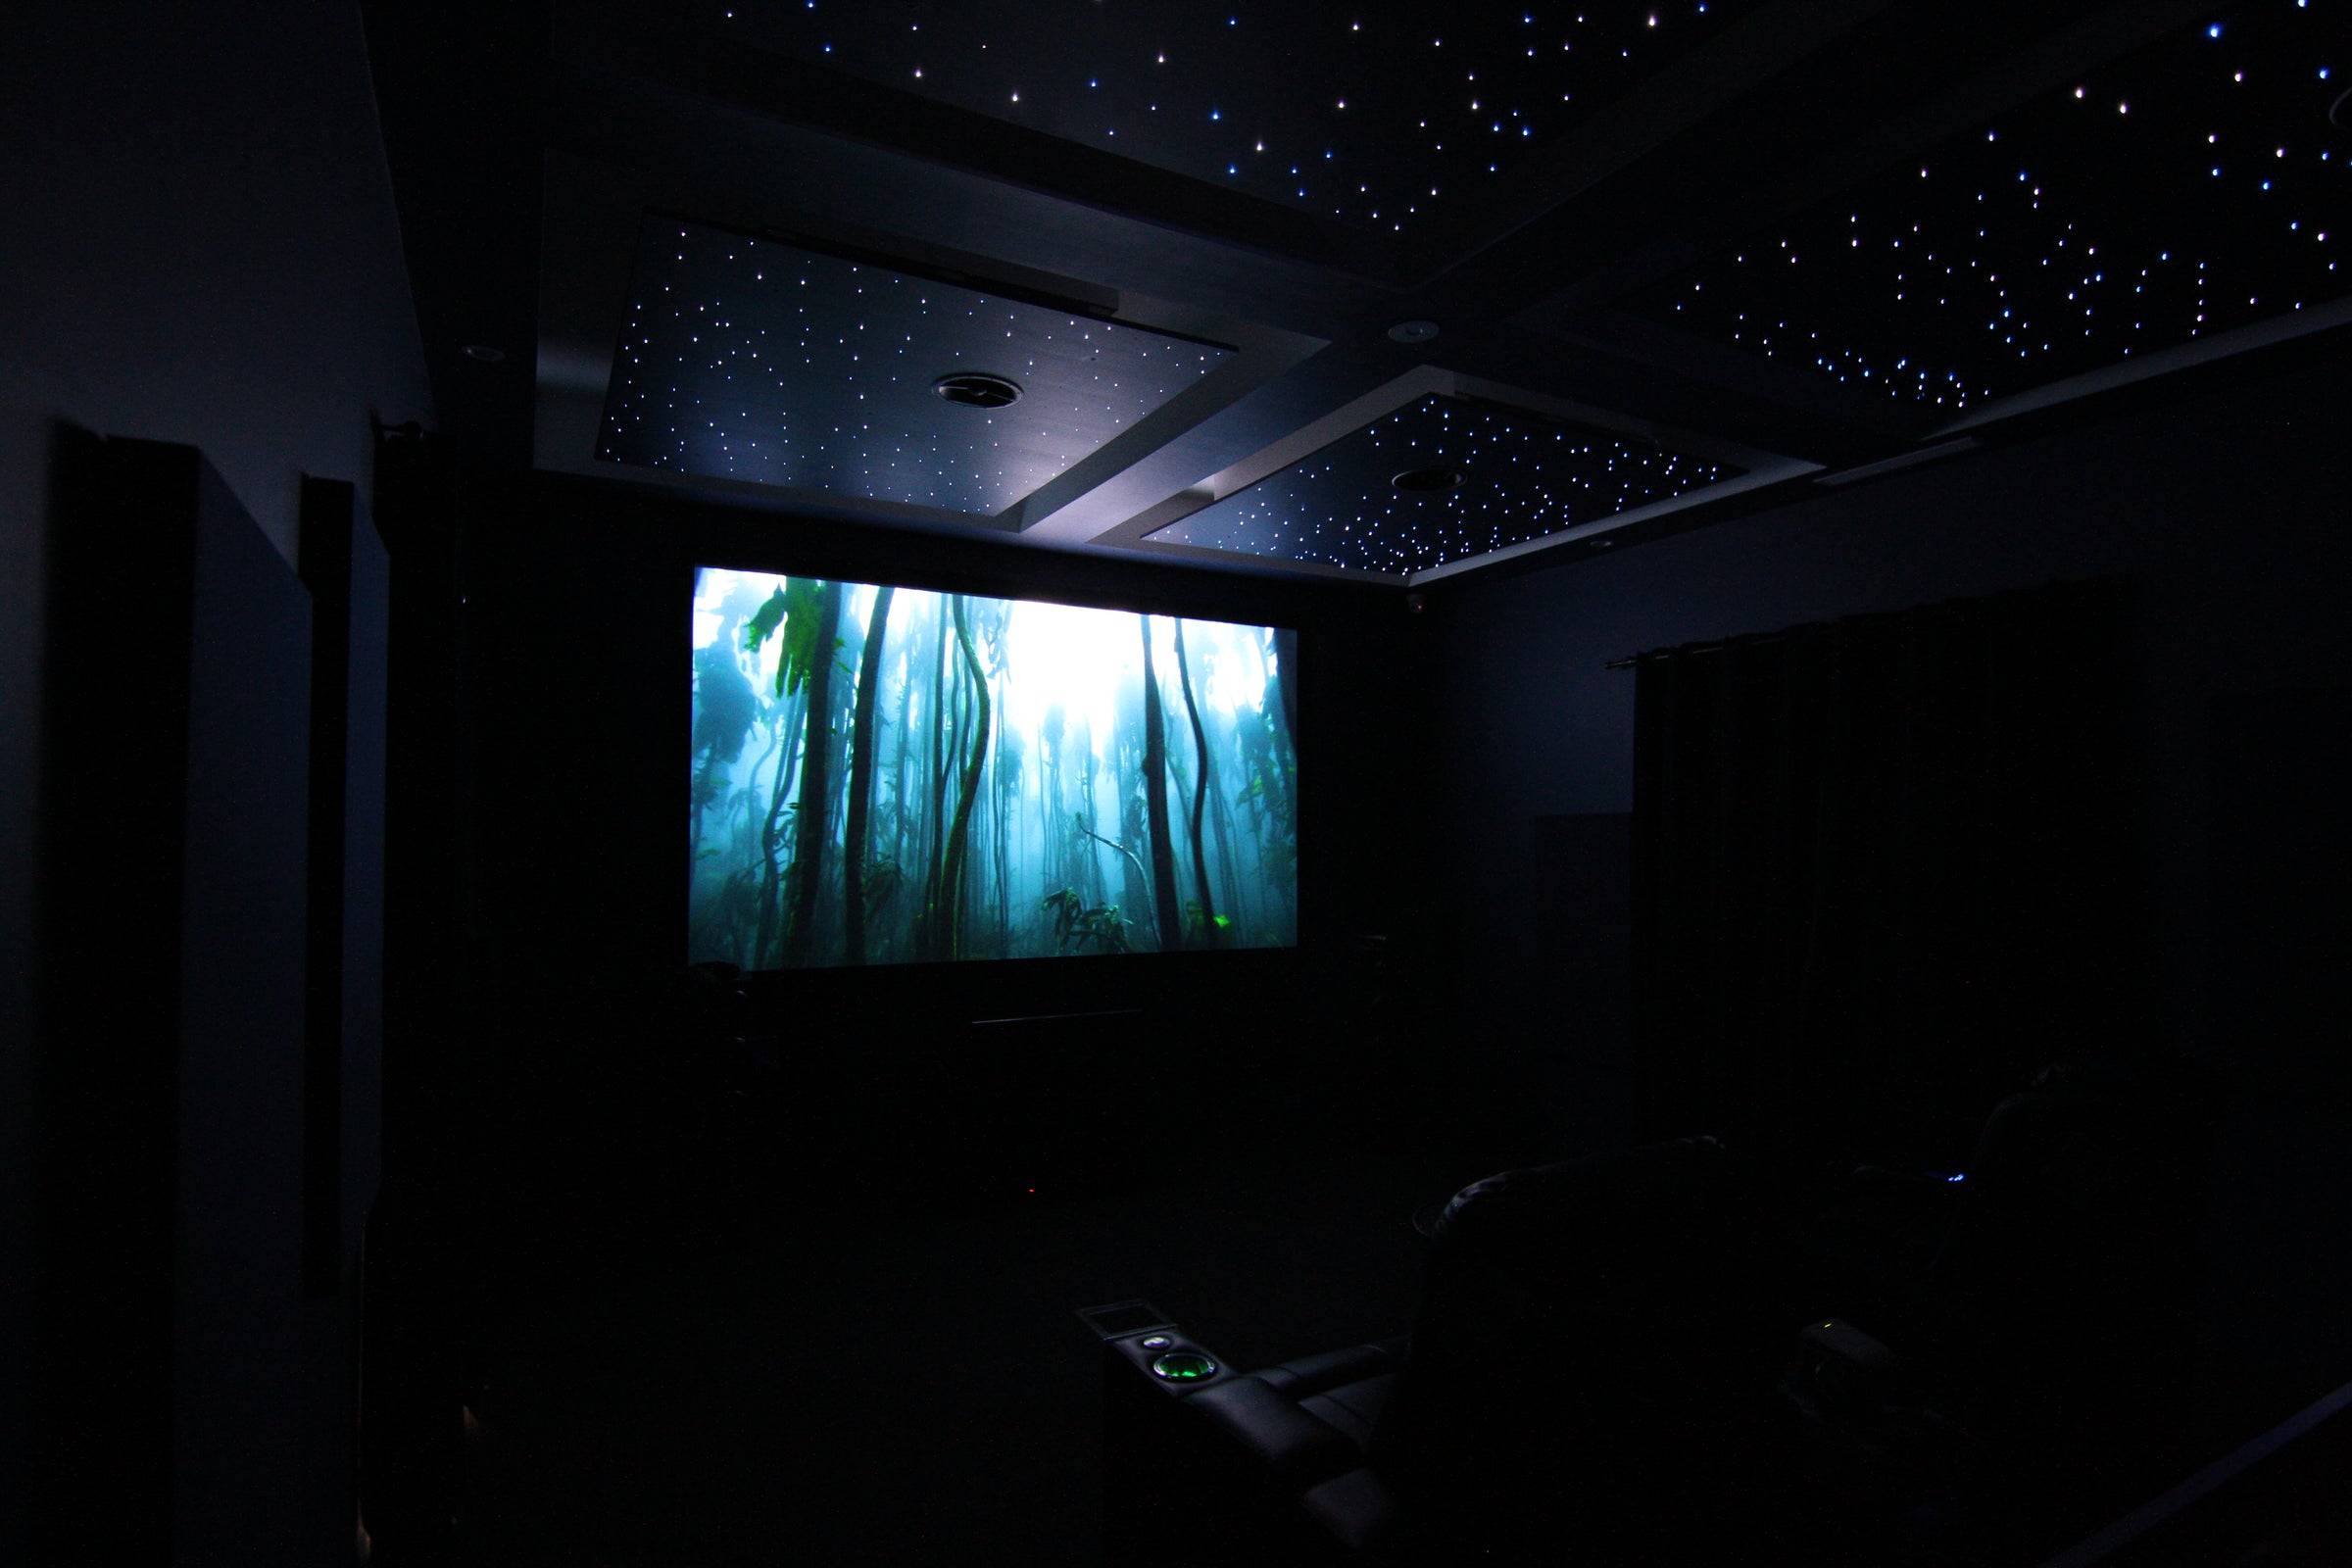 The Bowers & Wilkins in-ceiling speakers in a home theatre from Todds Hi Fi